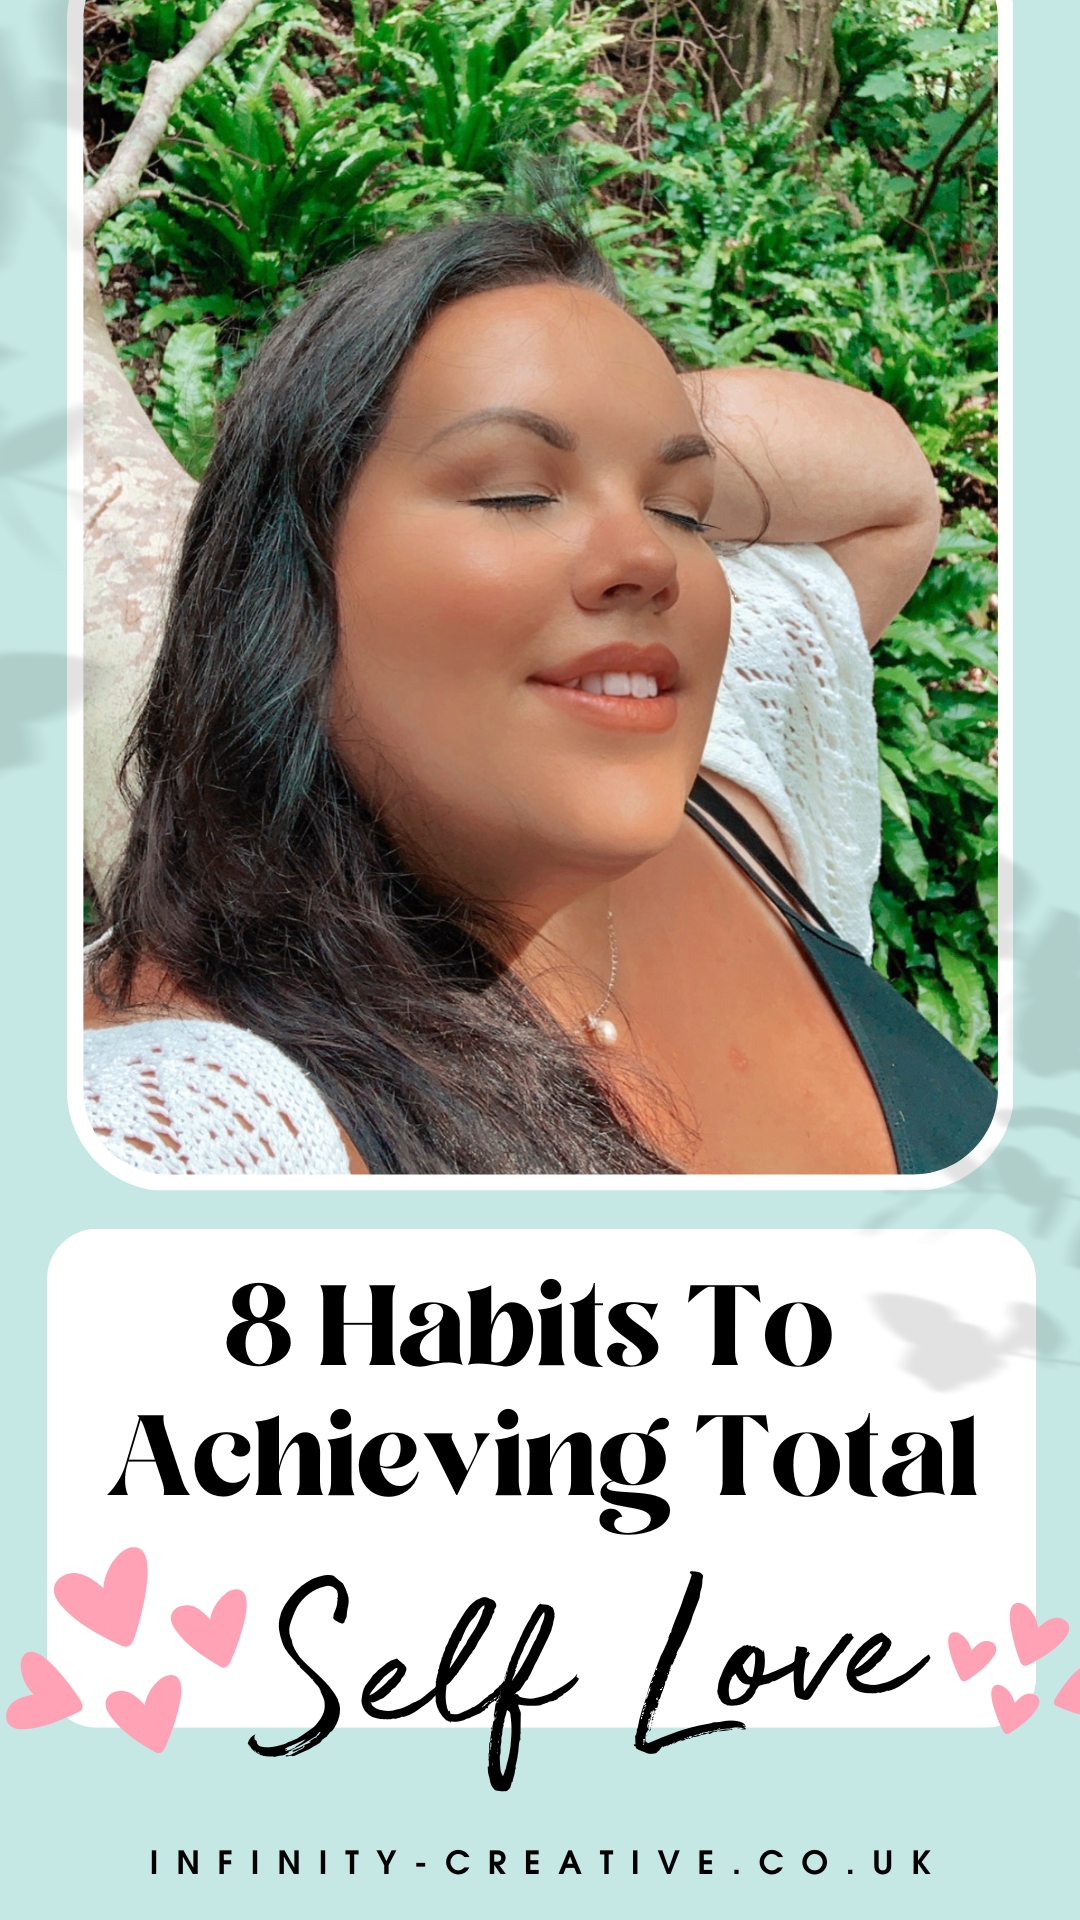 8 Habits To Achieving Total Self Love